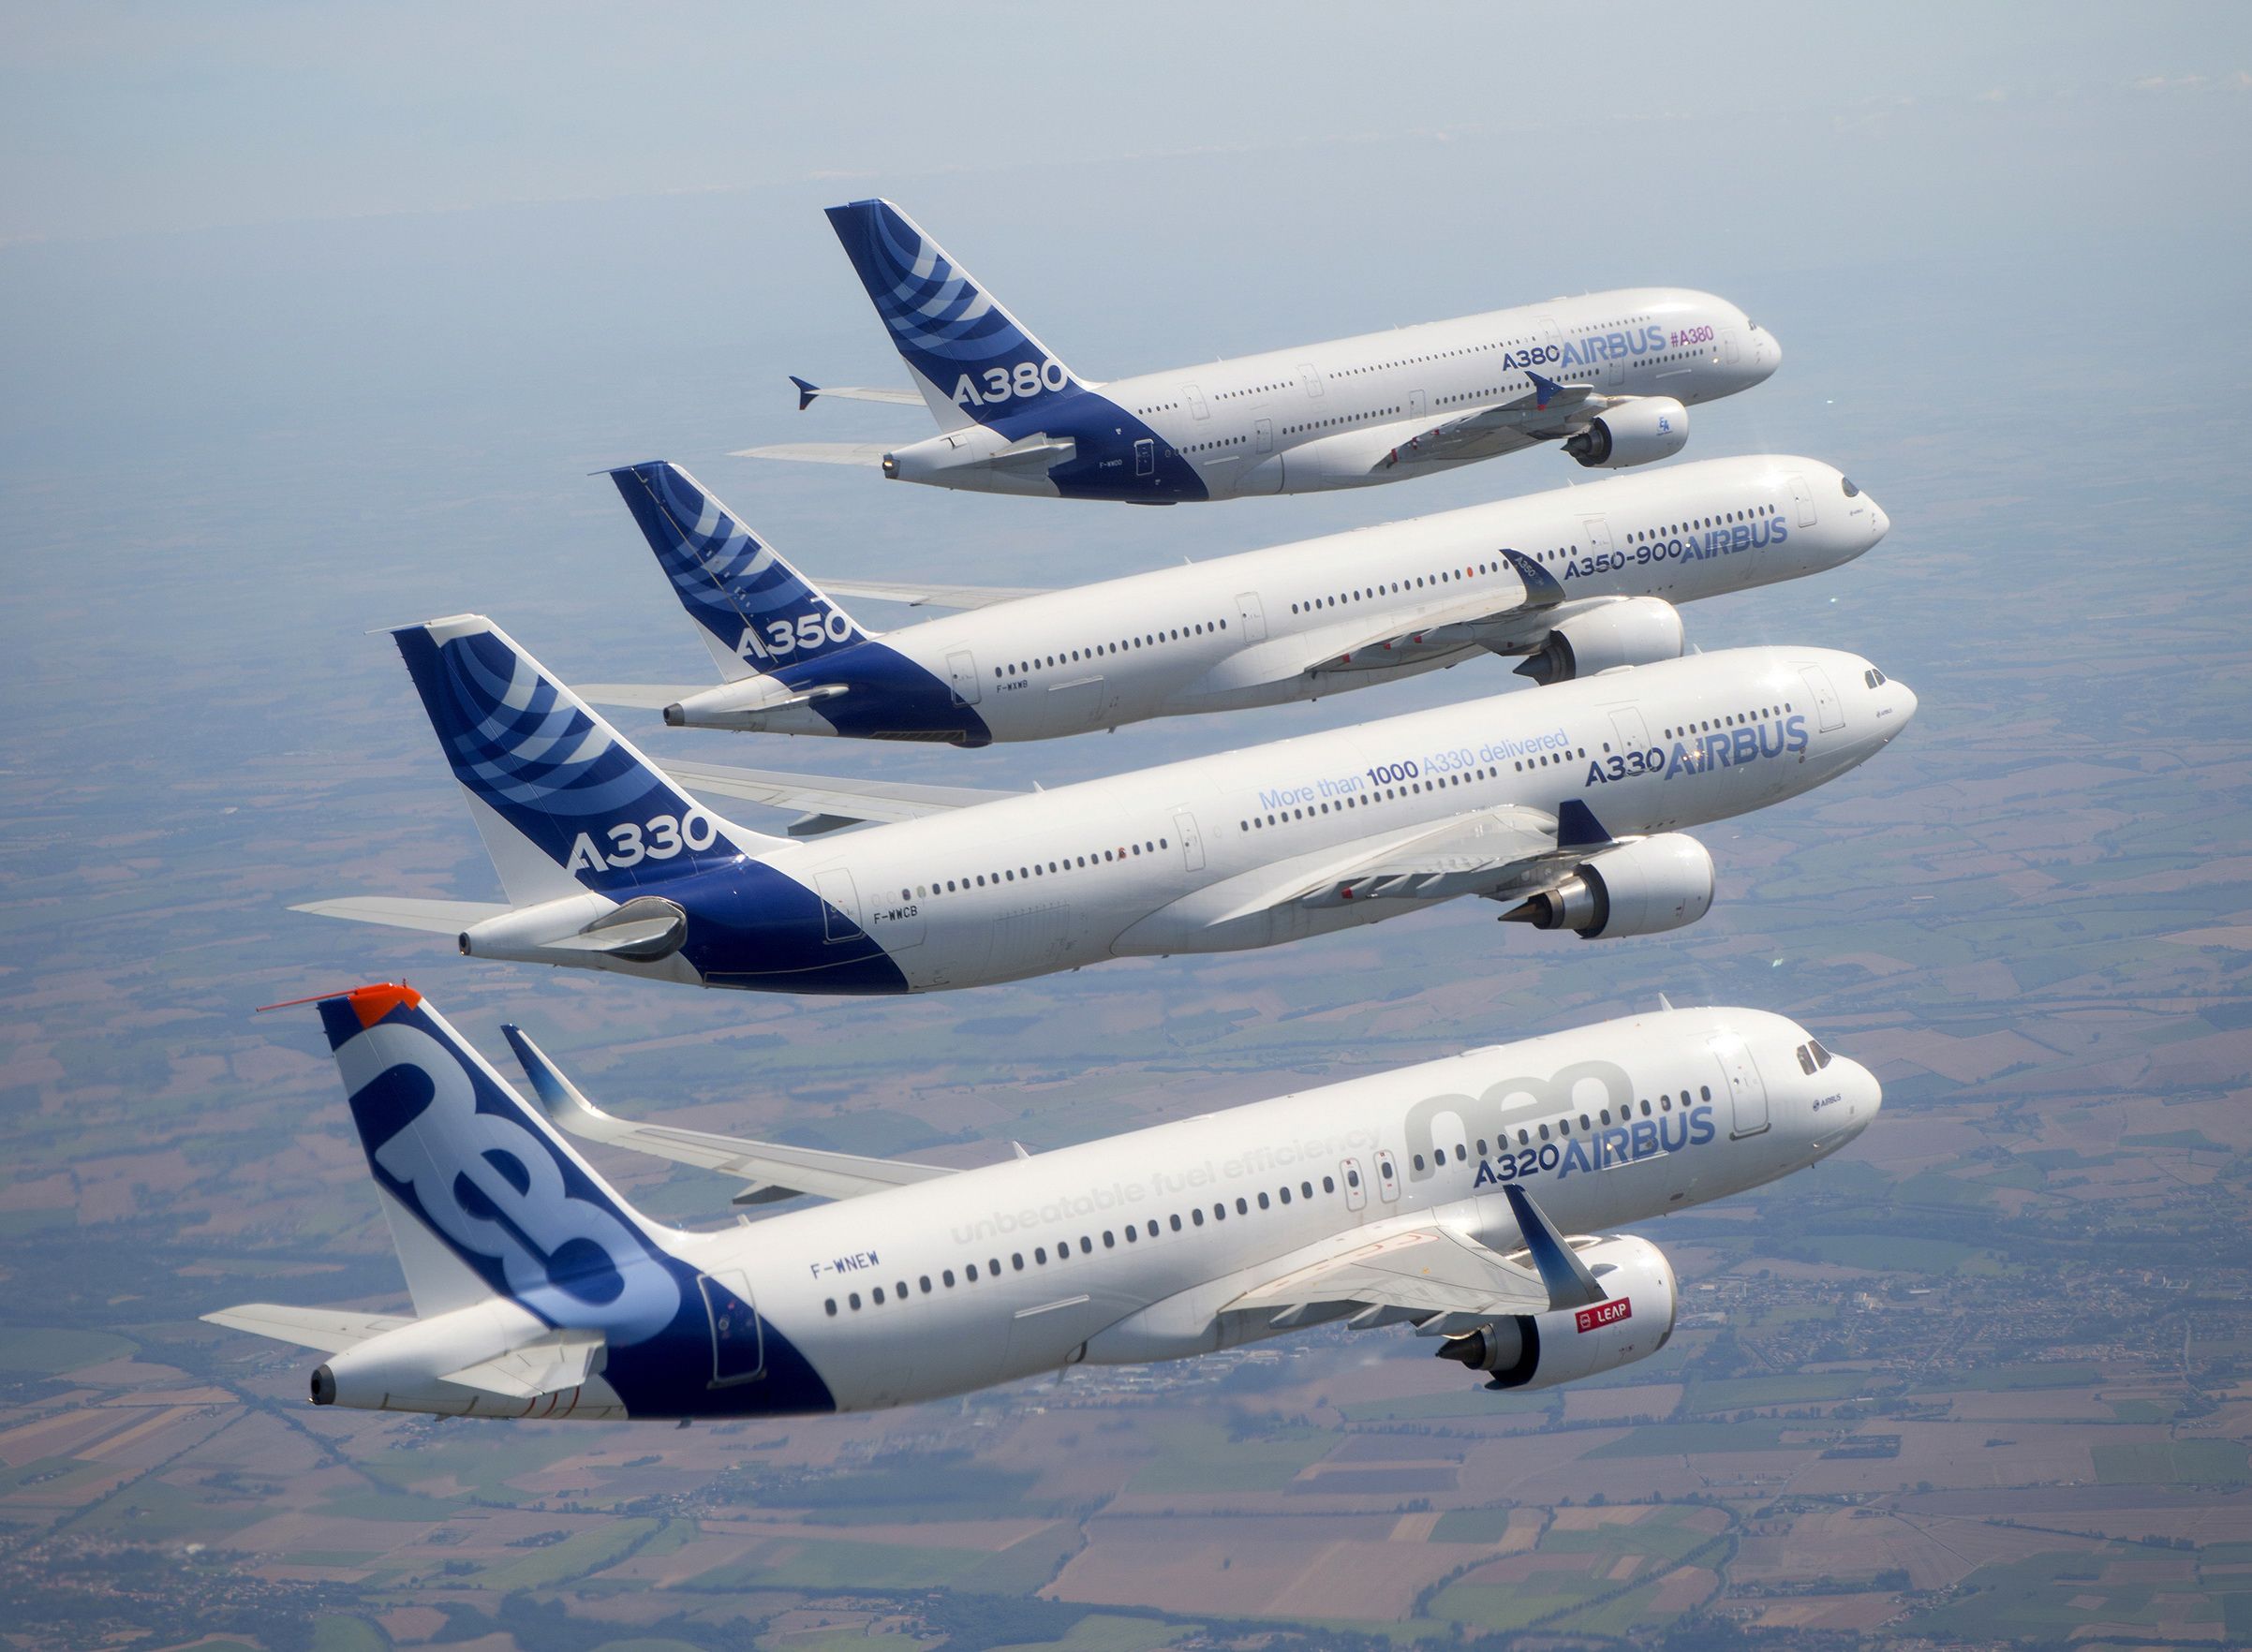 Airbus adapts commercial aircraft production and assembly activities in Northern Germany and Alabama sites in COVID-19 environment